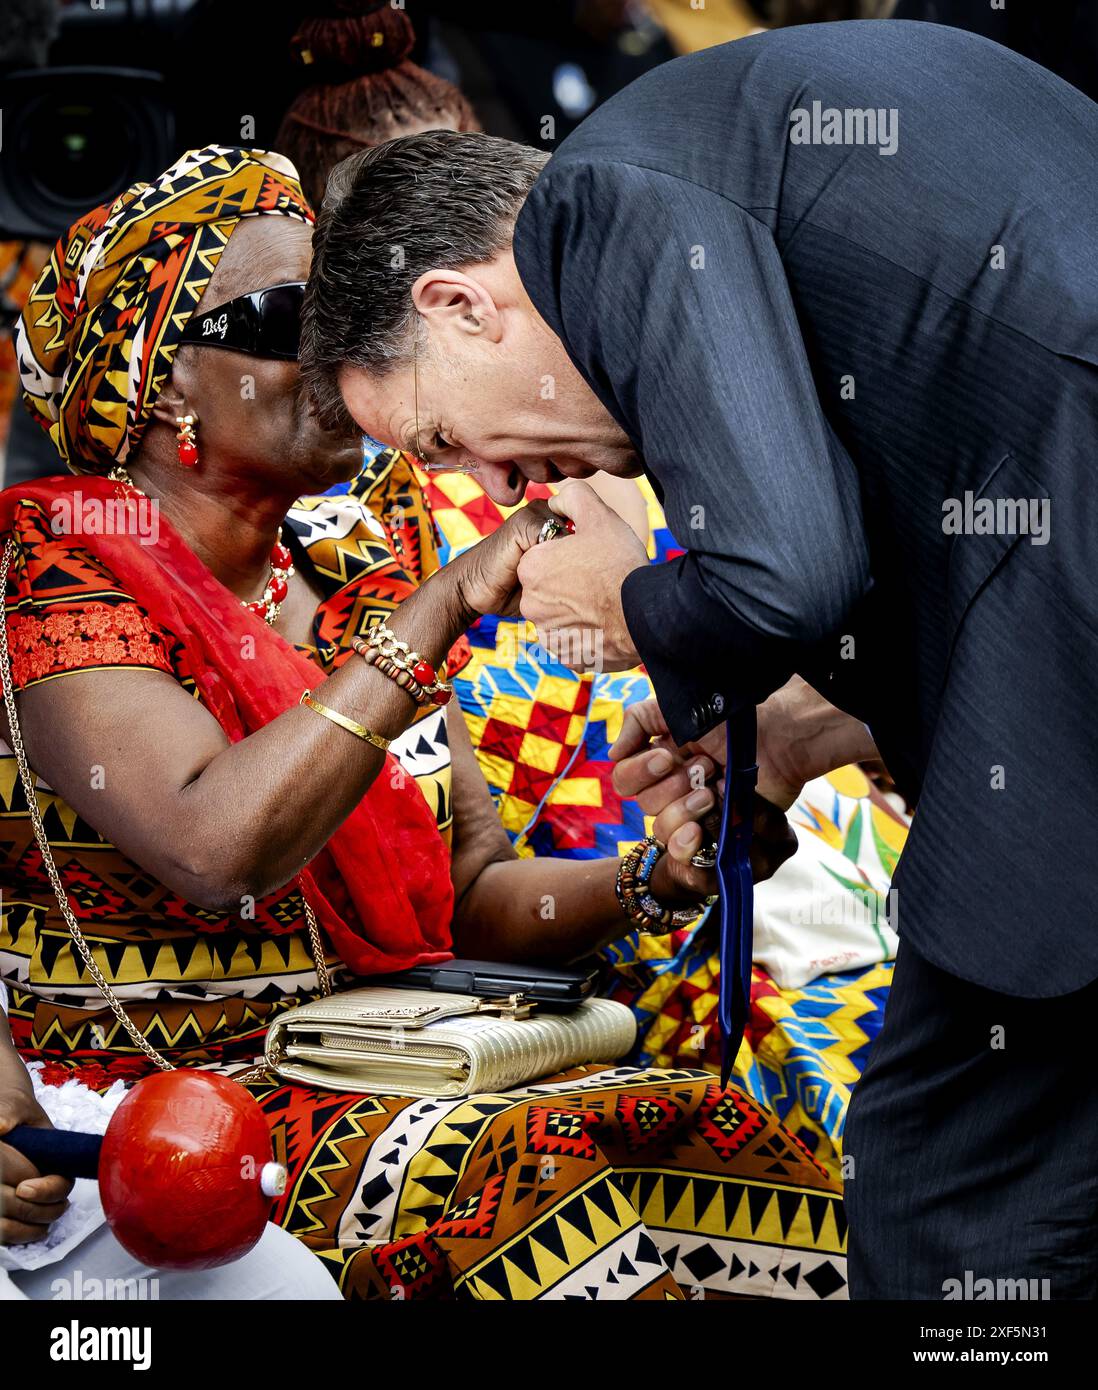 AMSTERDAM - Outgoing Prime Minister Mark Rutte gives a kiss on the hand during the national commemoration of the abolition of slavery at the slavery monument in the Oosterpark. The commemoration is organized by the National Institute for the Dutch Slavery History and Legacy (NiNsee). ANP ROBIN VAN LONKHUIJSEN netherlands out - belgium out Stock Photo